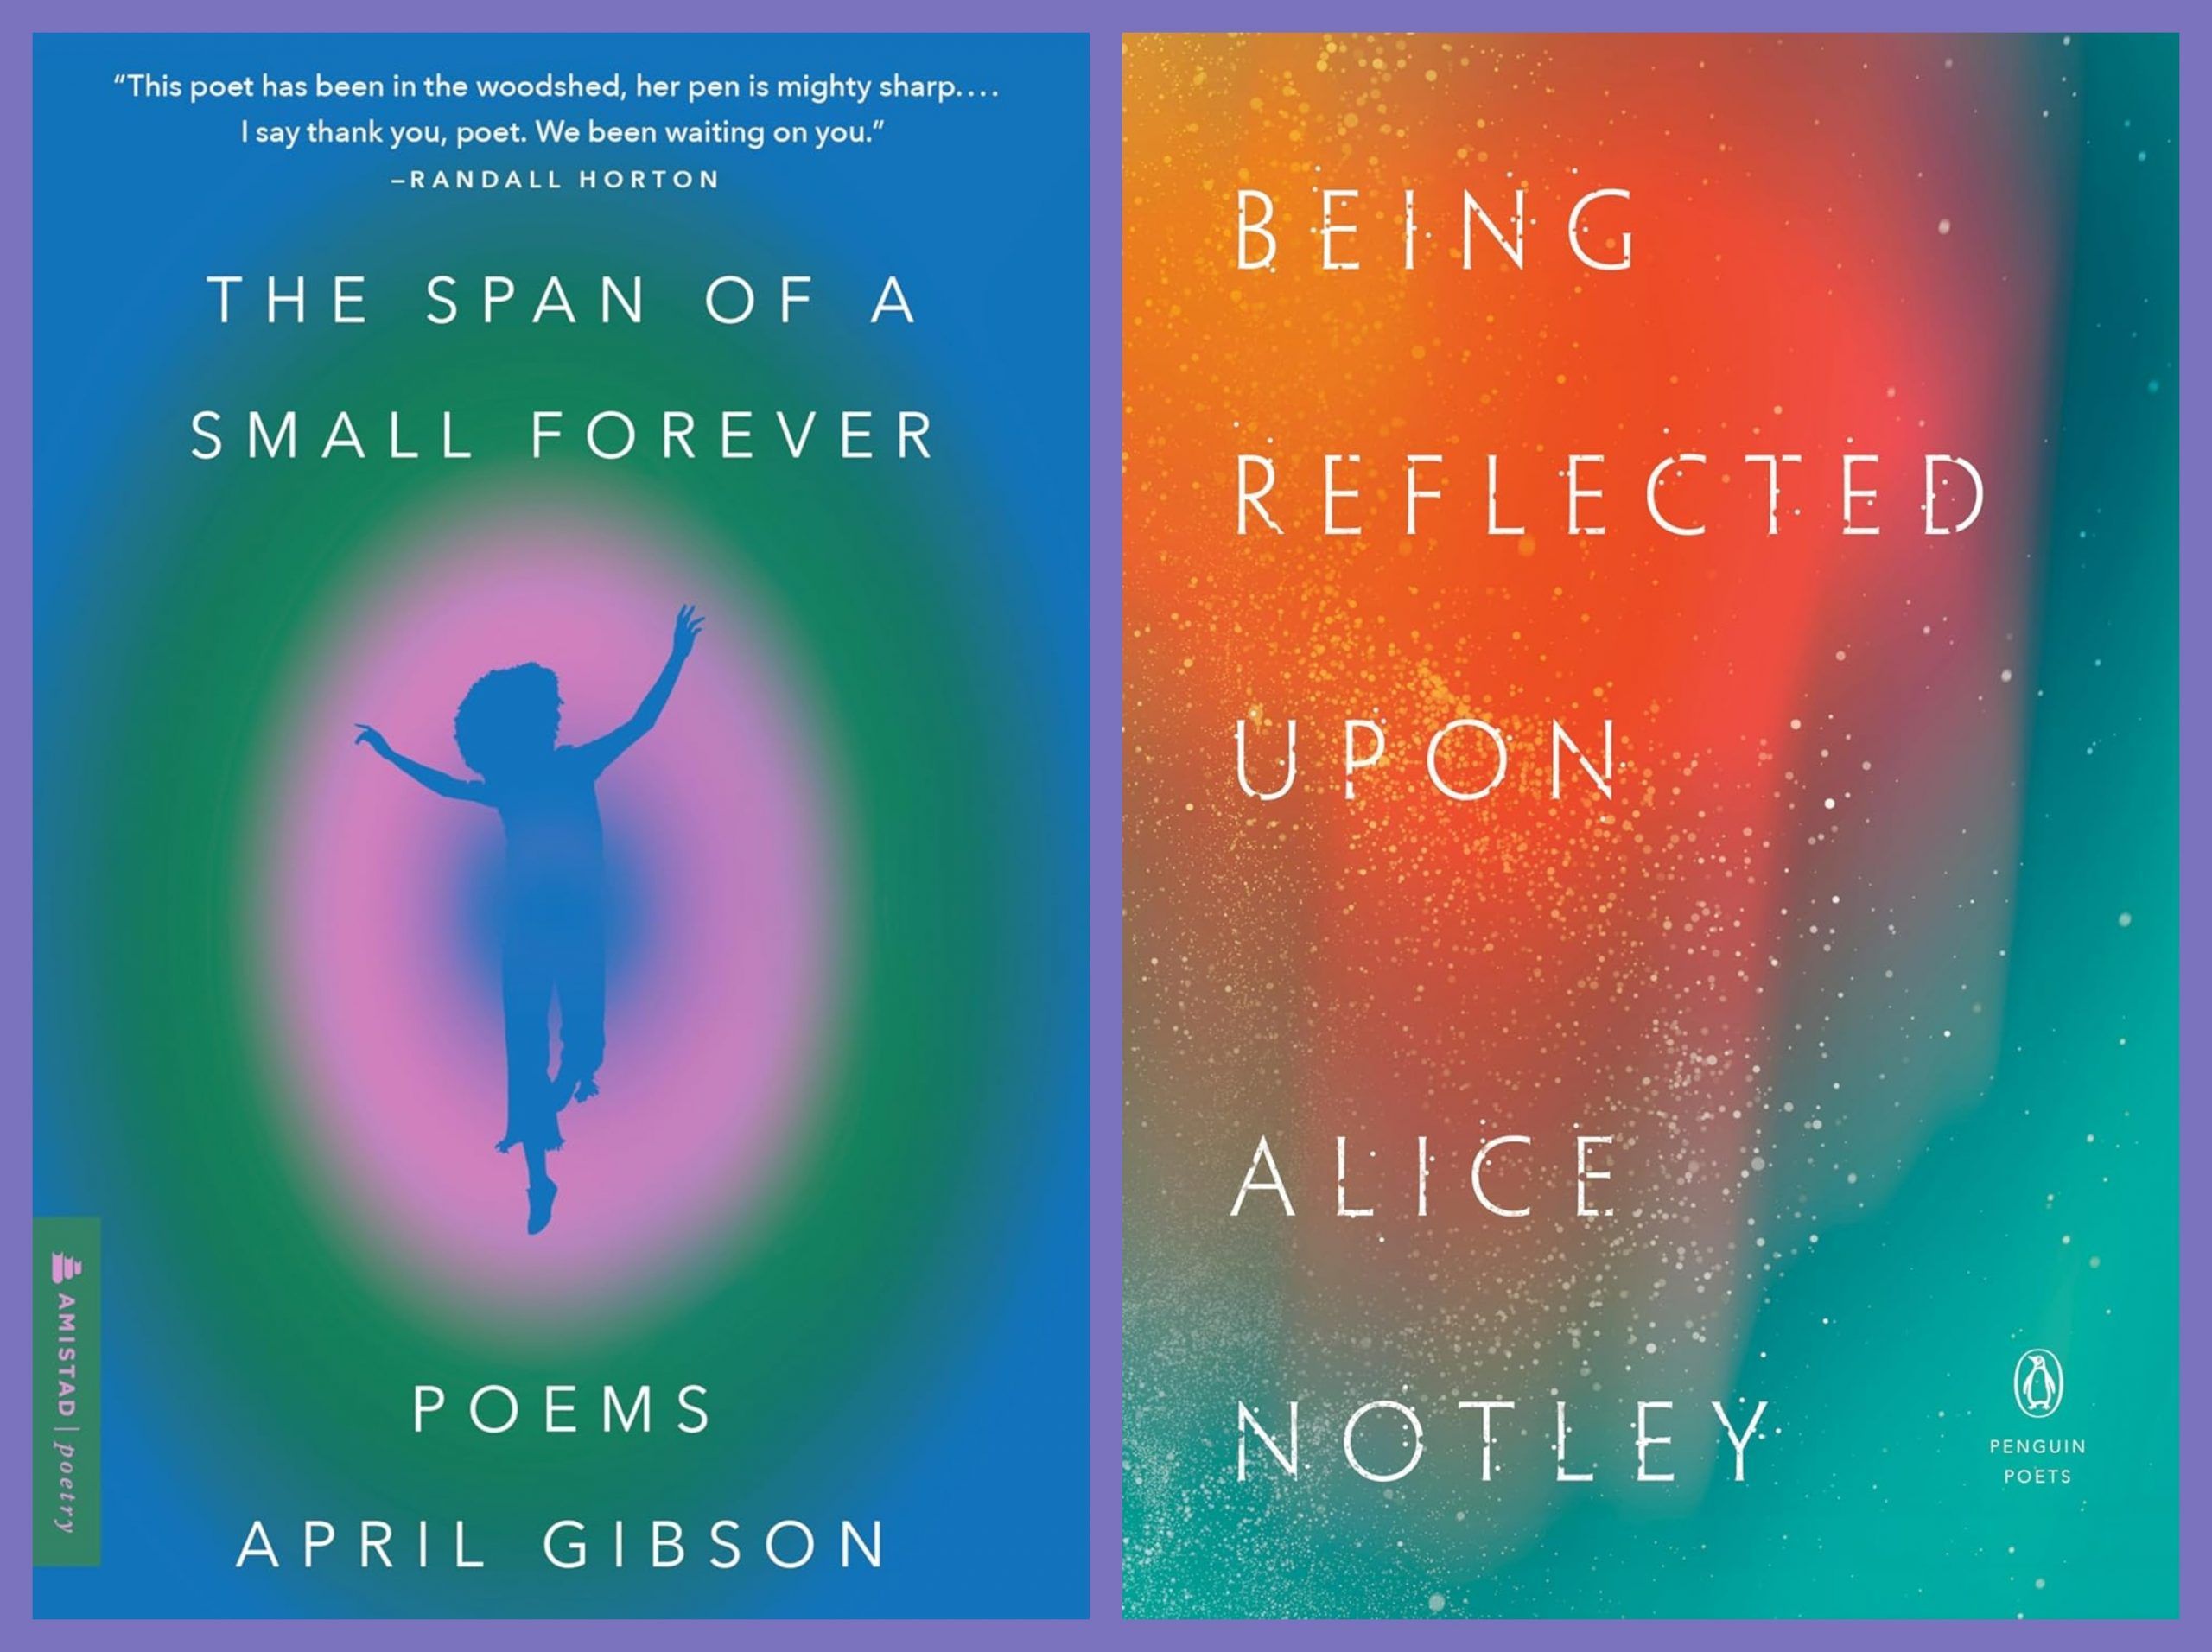 Stacked Time: On April Gibson’s “The Span of a Small Forever” and Alice Notley’s “Being Reflected Upon”